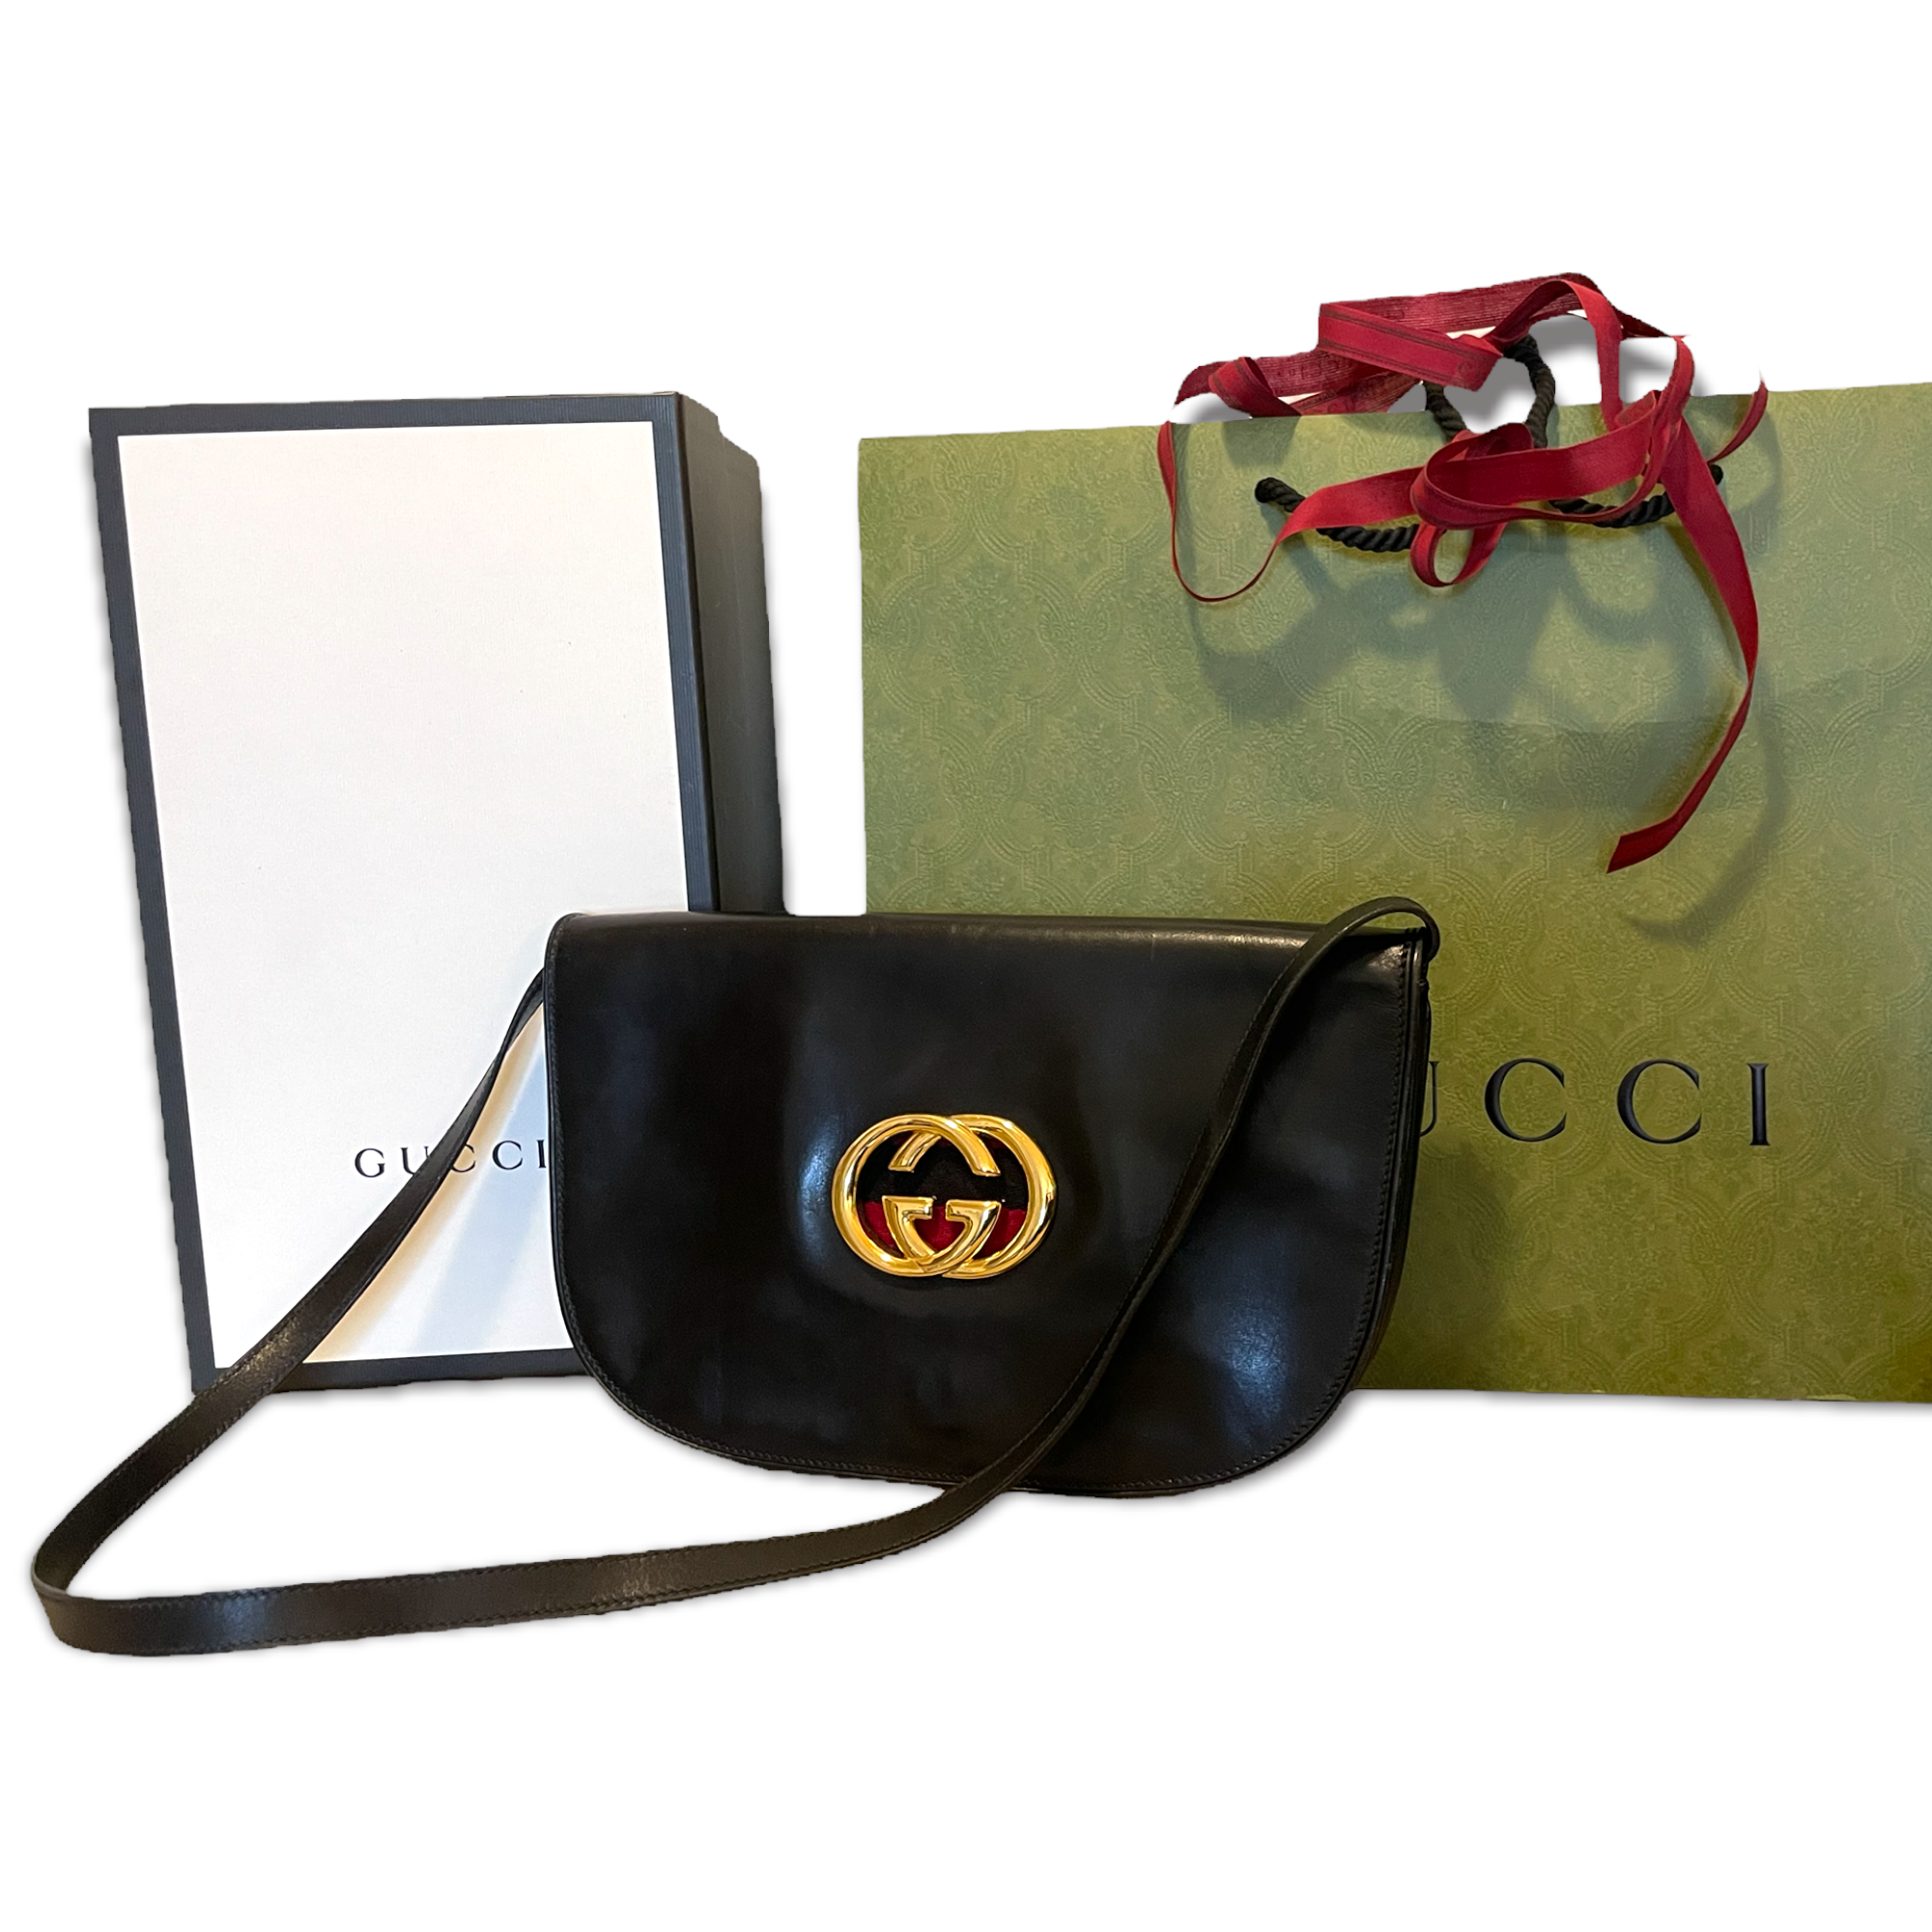 GUCCI Italy black leather blondie clutch-shoulder bag circa 1970’s